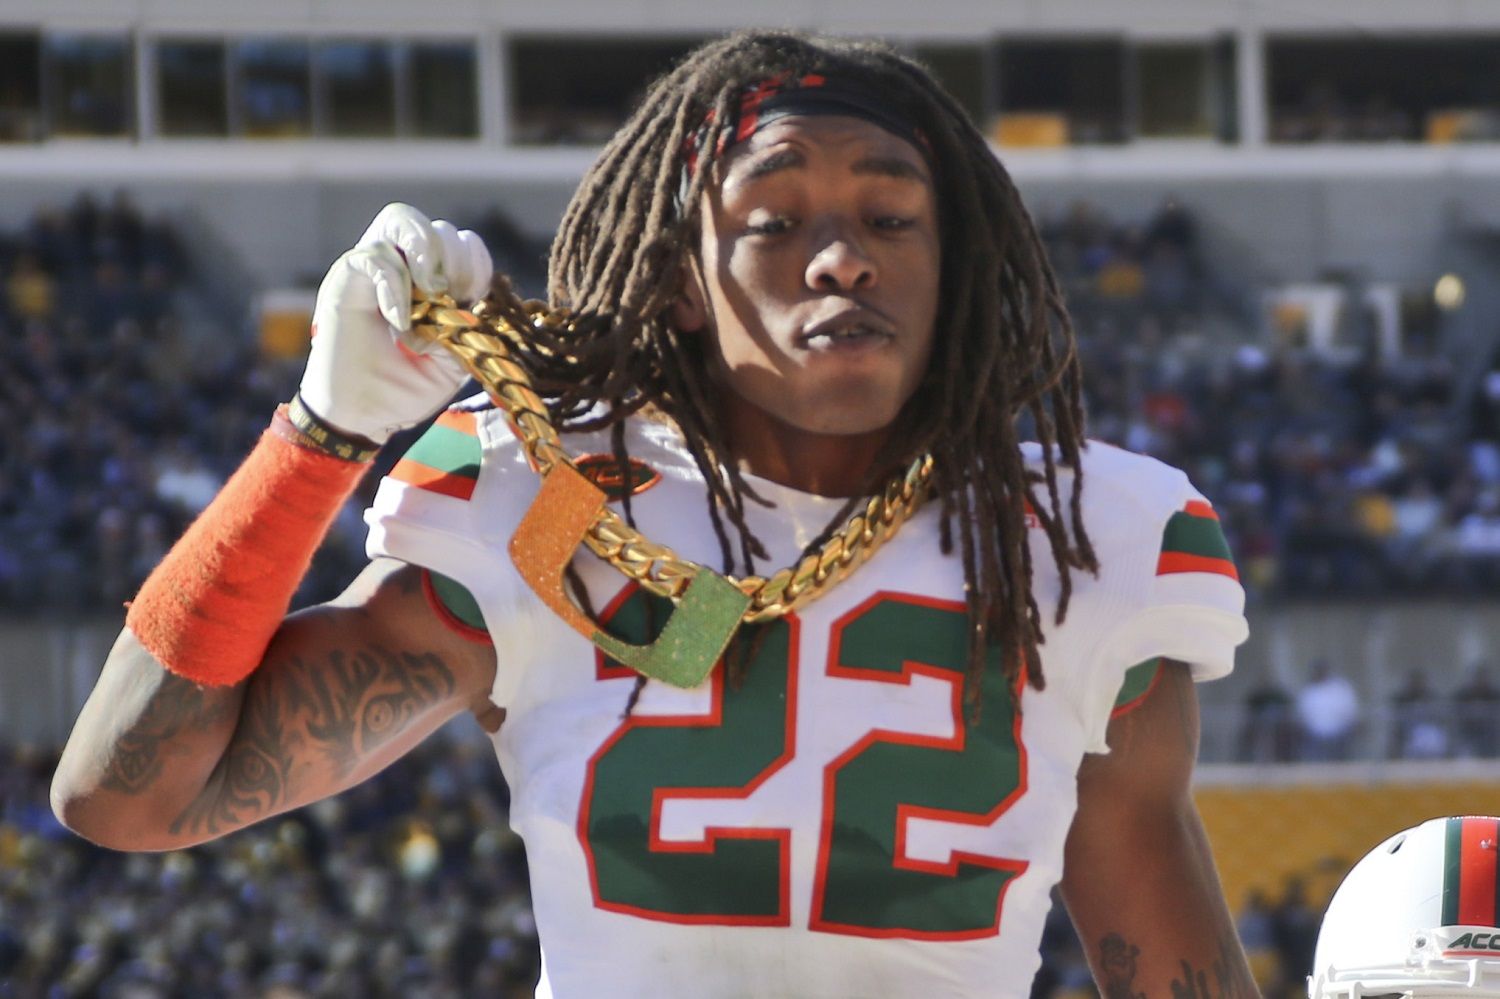 Miami defensive back Sheldrick Redwine (22) shows off their "U" turnover chain after recovering a fumble against Pittsburgh in an NCAA college football game, Friday, Nov. 24, 2017, in Pittsburgh. (AP Photo/Keith Srakocic)